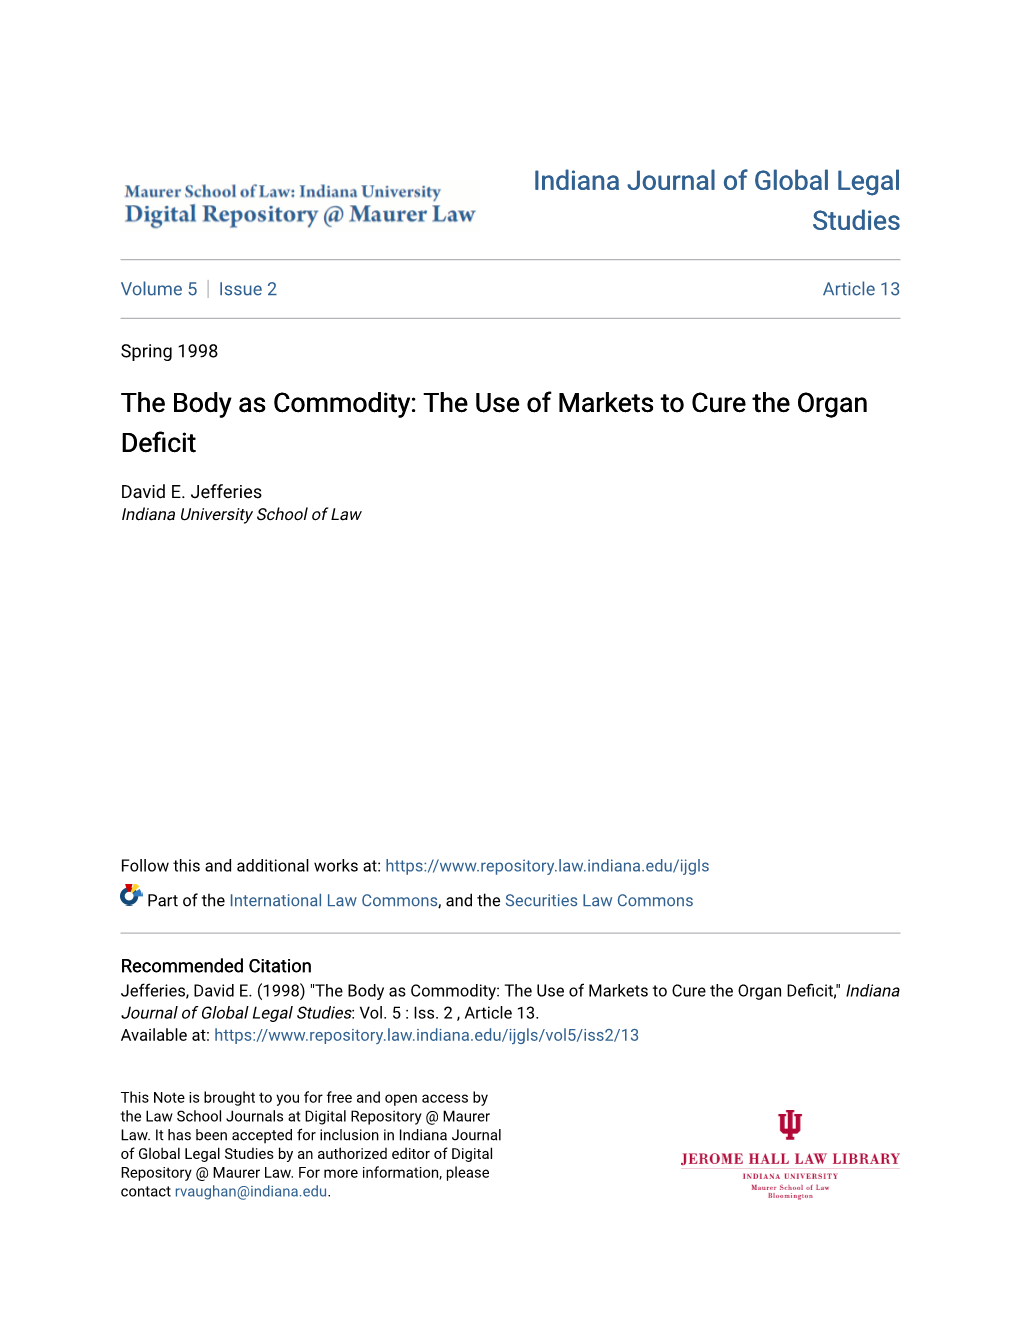 The Body As Commodity: the Use of Markets to Cure the Organ Deficit